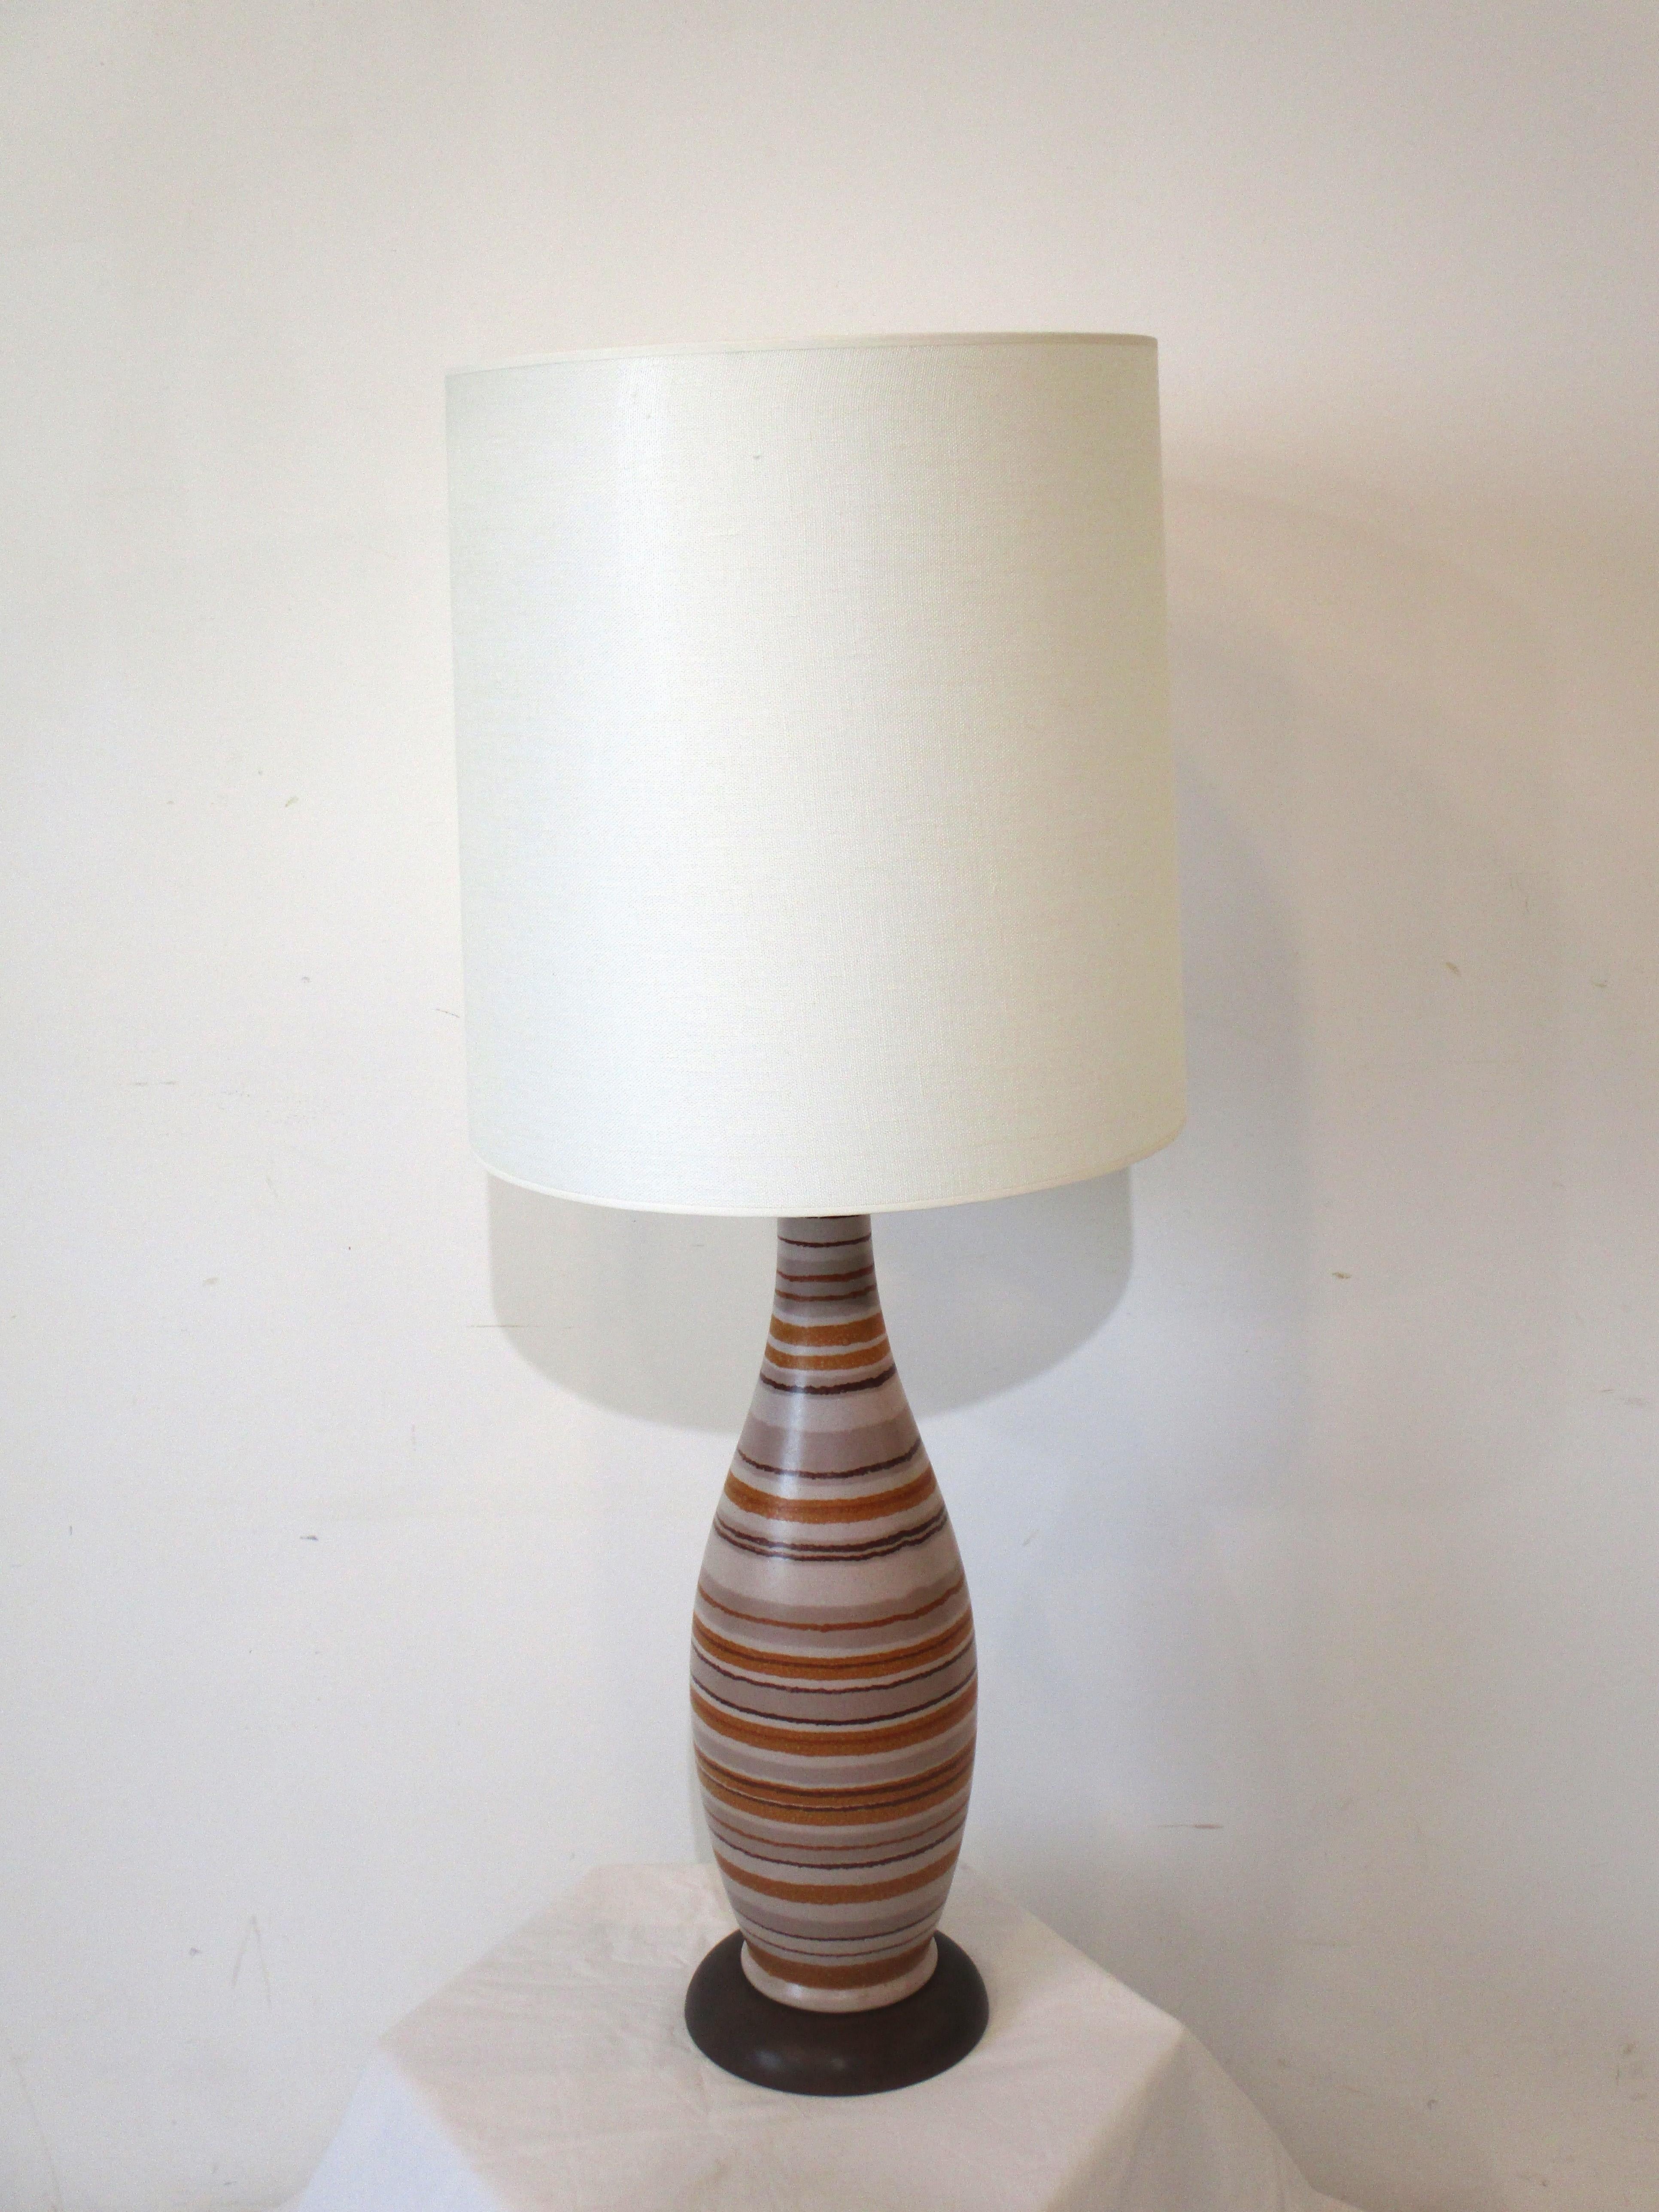 A midcentury ceramic table lamp with beige colored body having lines of burnt orange, browns and tans. Sitting on a dark walnut toned wood base topped with a cream colored linen shade manufactured in the manner of Bitossi Italy. A visually well